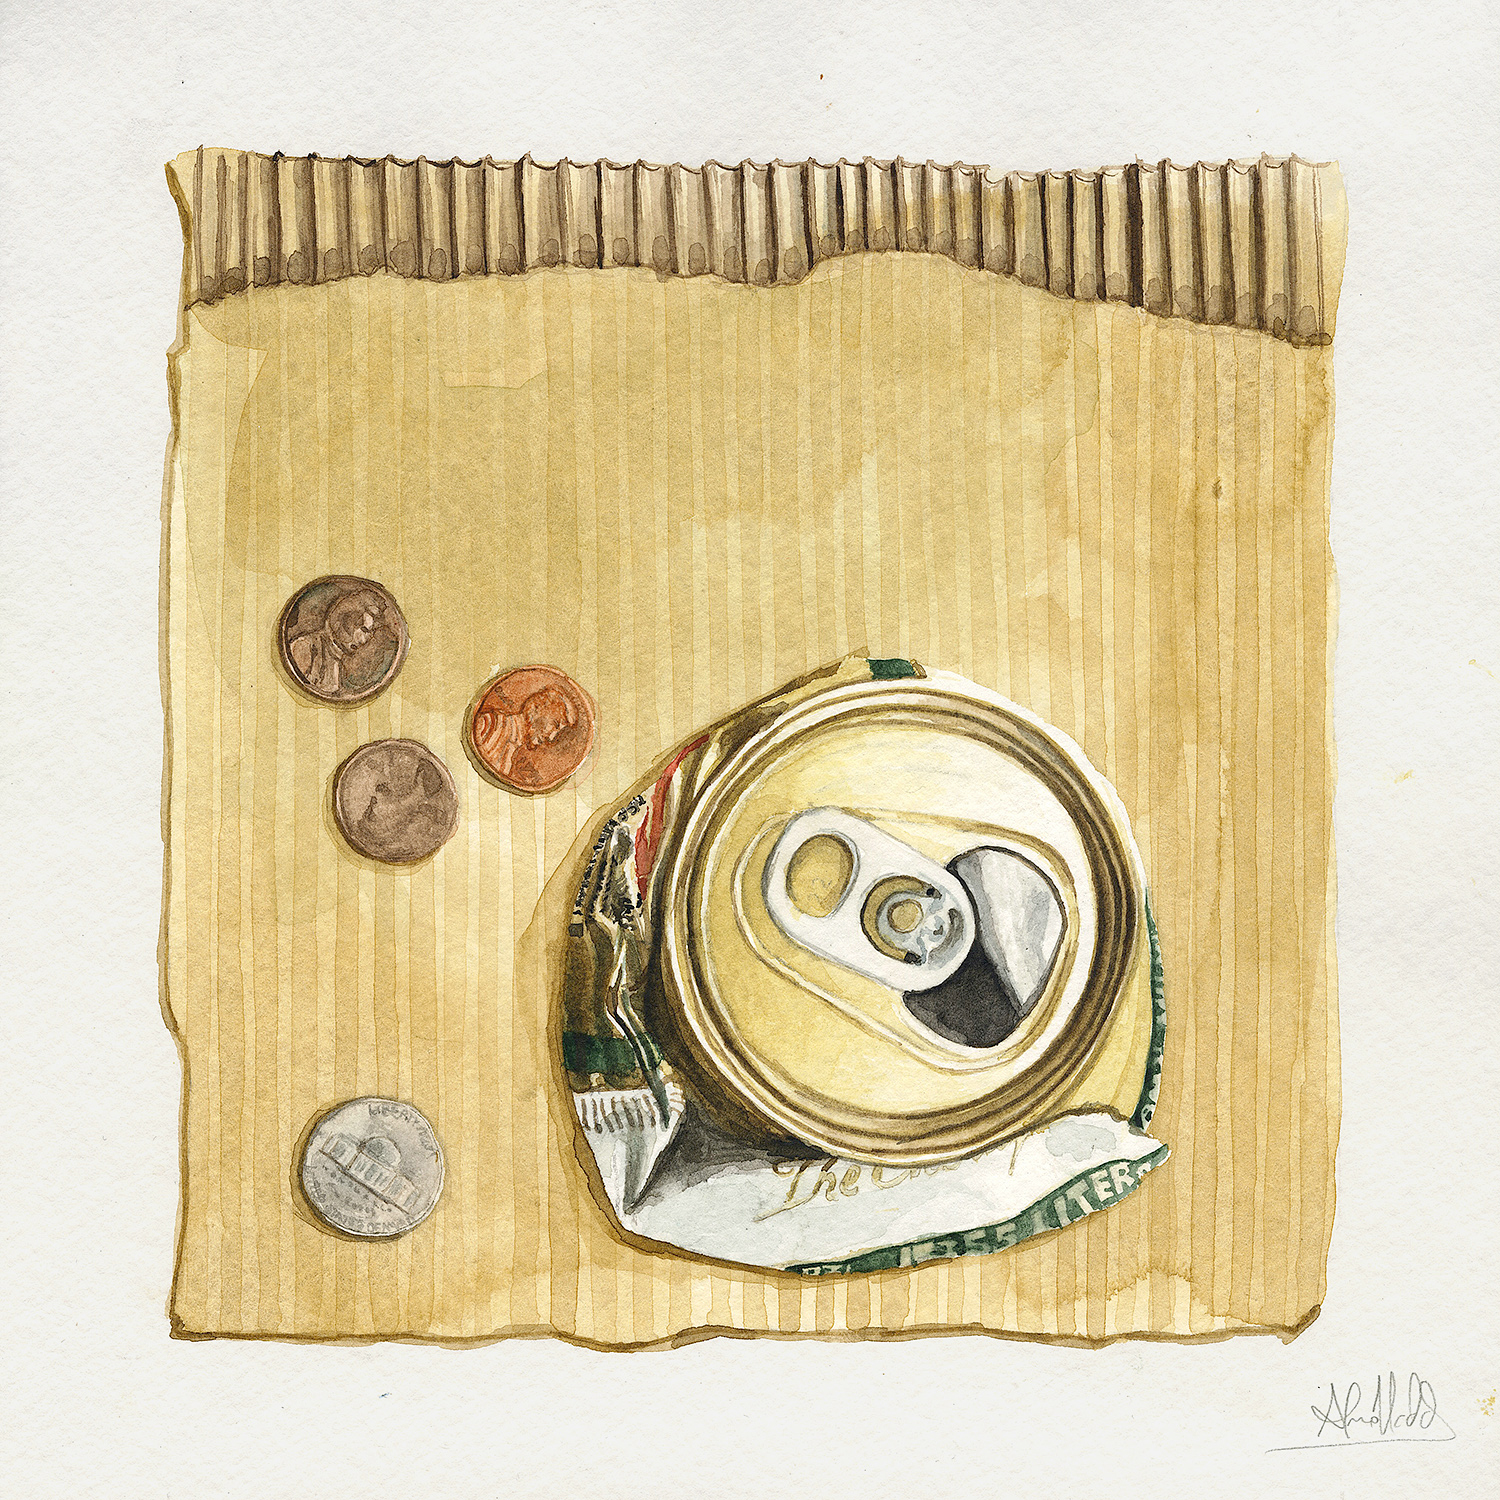 Alvaro Naddeo, Thirteen Cents, 2015. Watercolor on paper, 9 x 9 in.